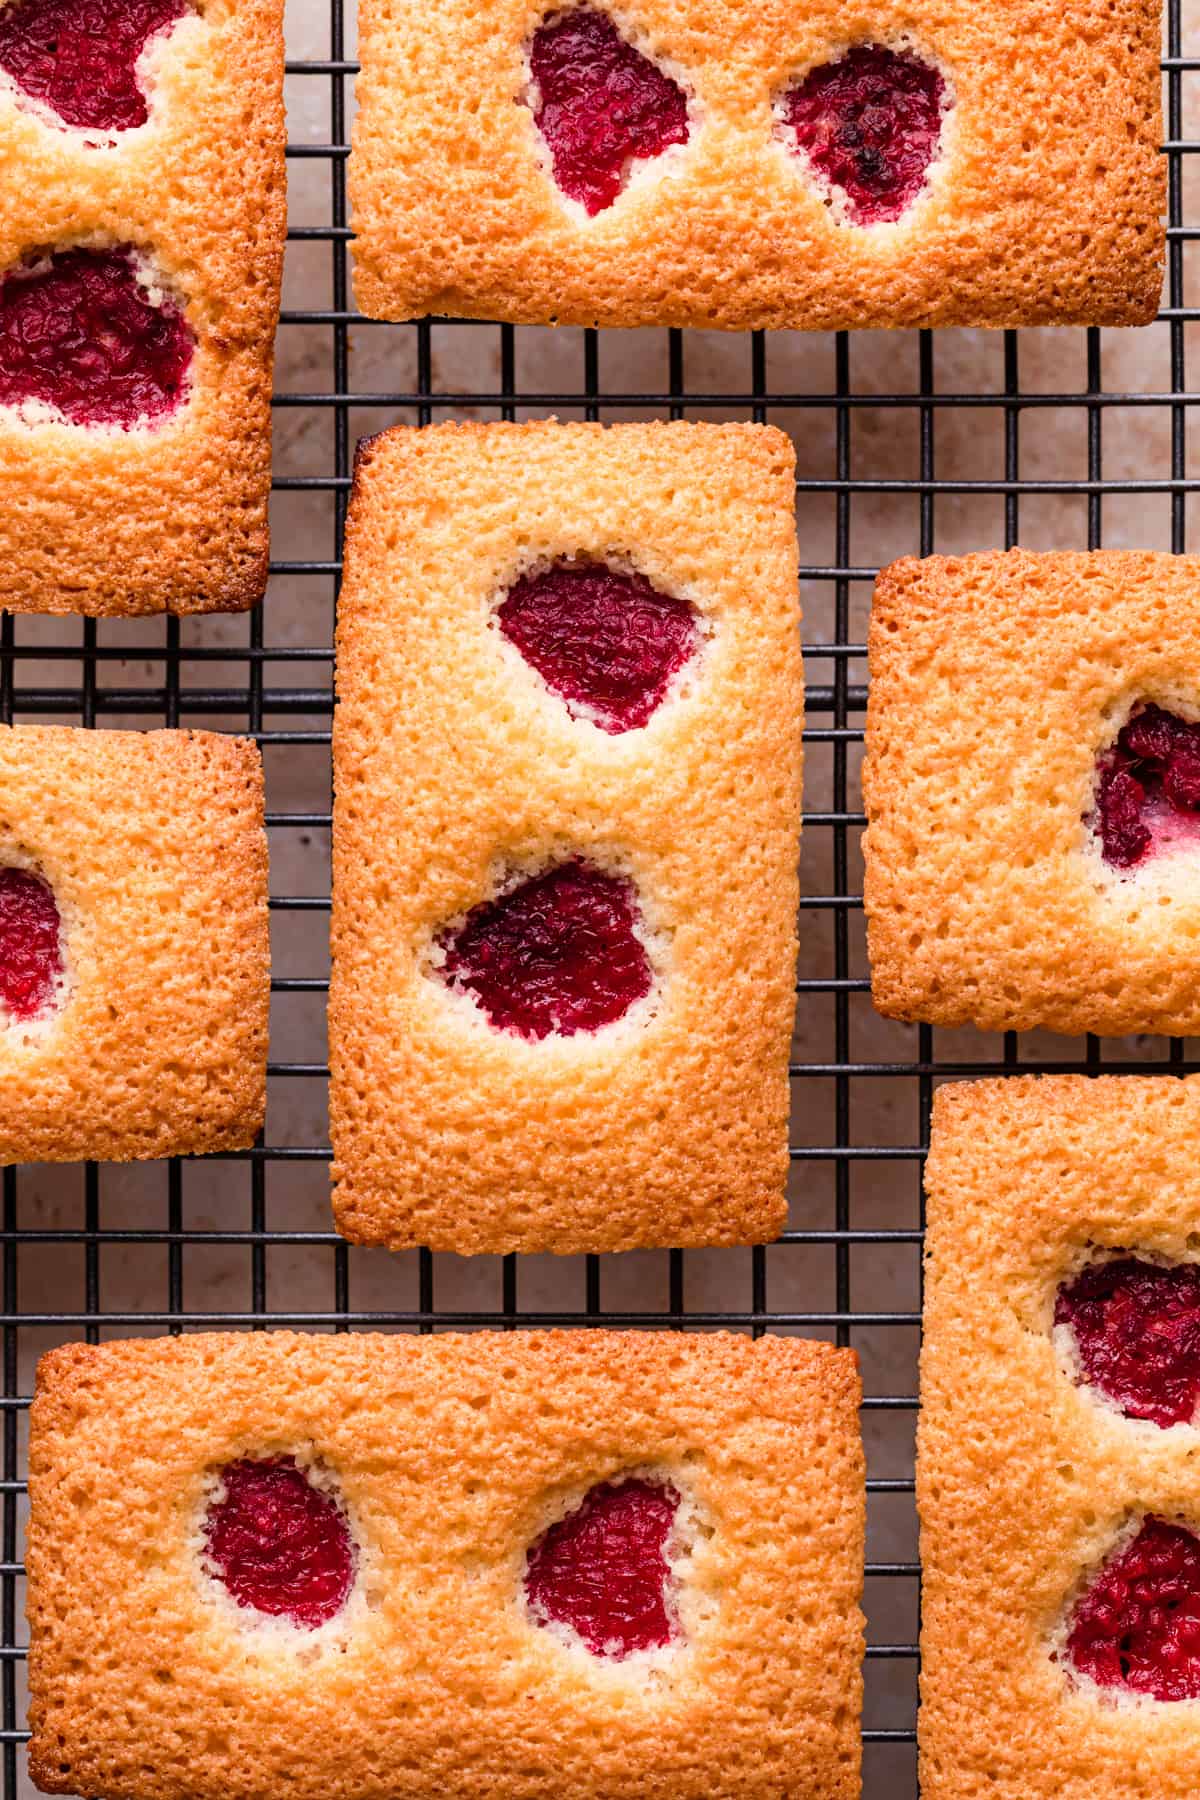 Raspberry Rose Financiers. Super light, soft and delicious cakes topped with juicy raspberries soaked in rose wine. So delicious! | http://annabanana.co/